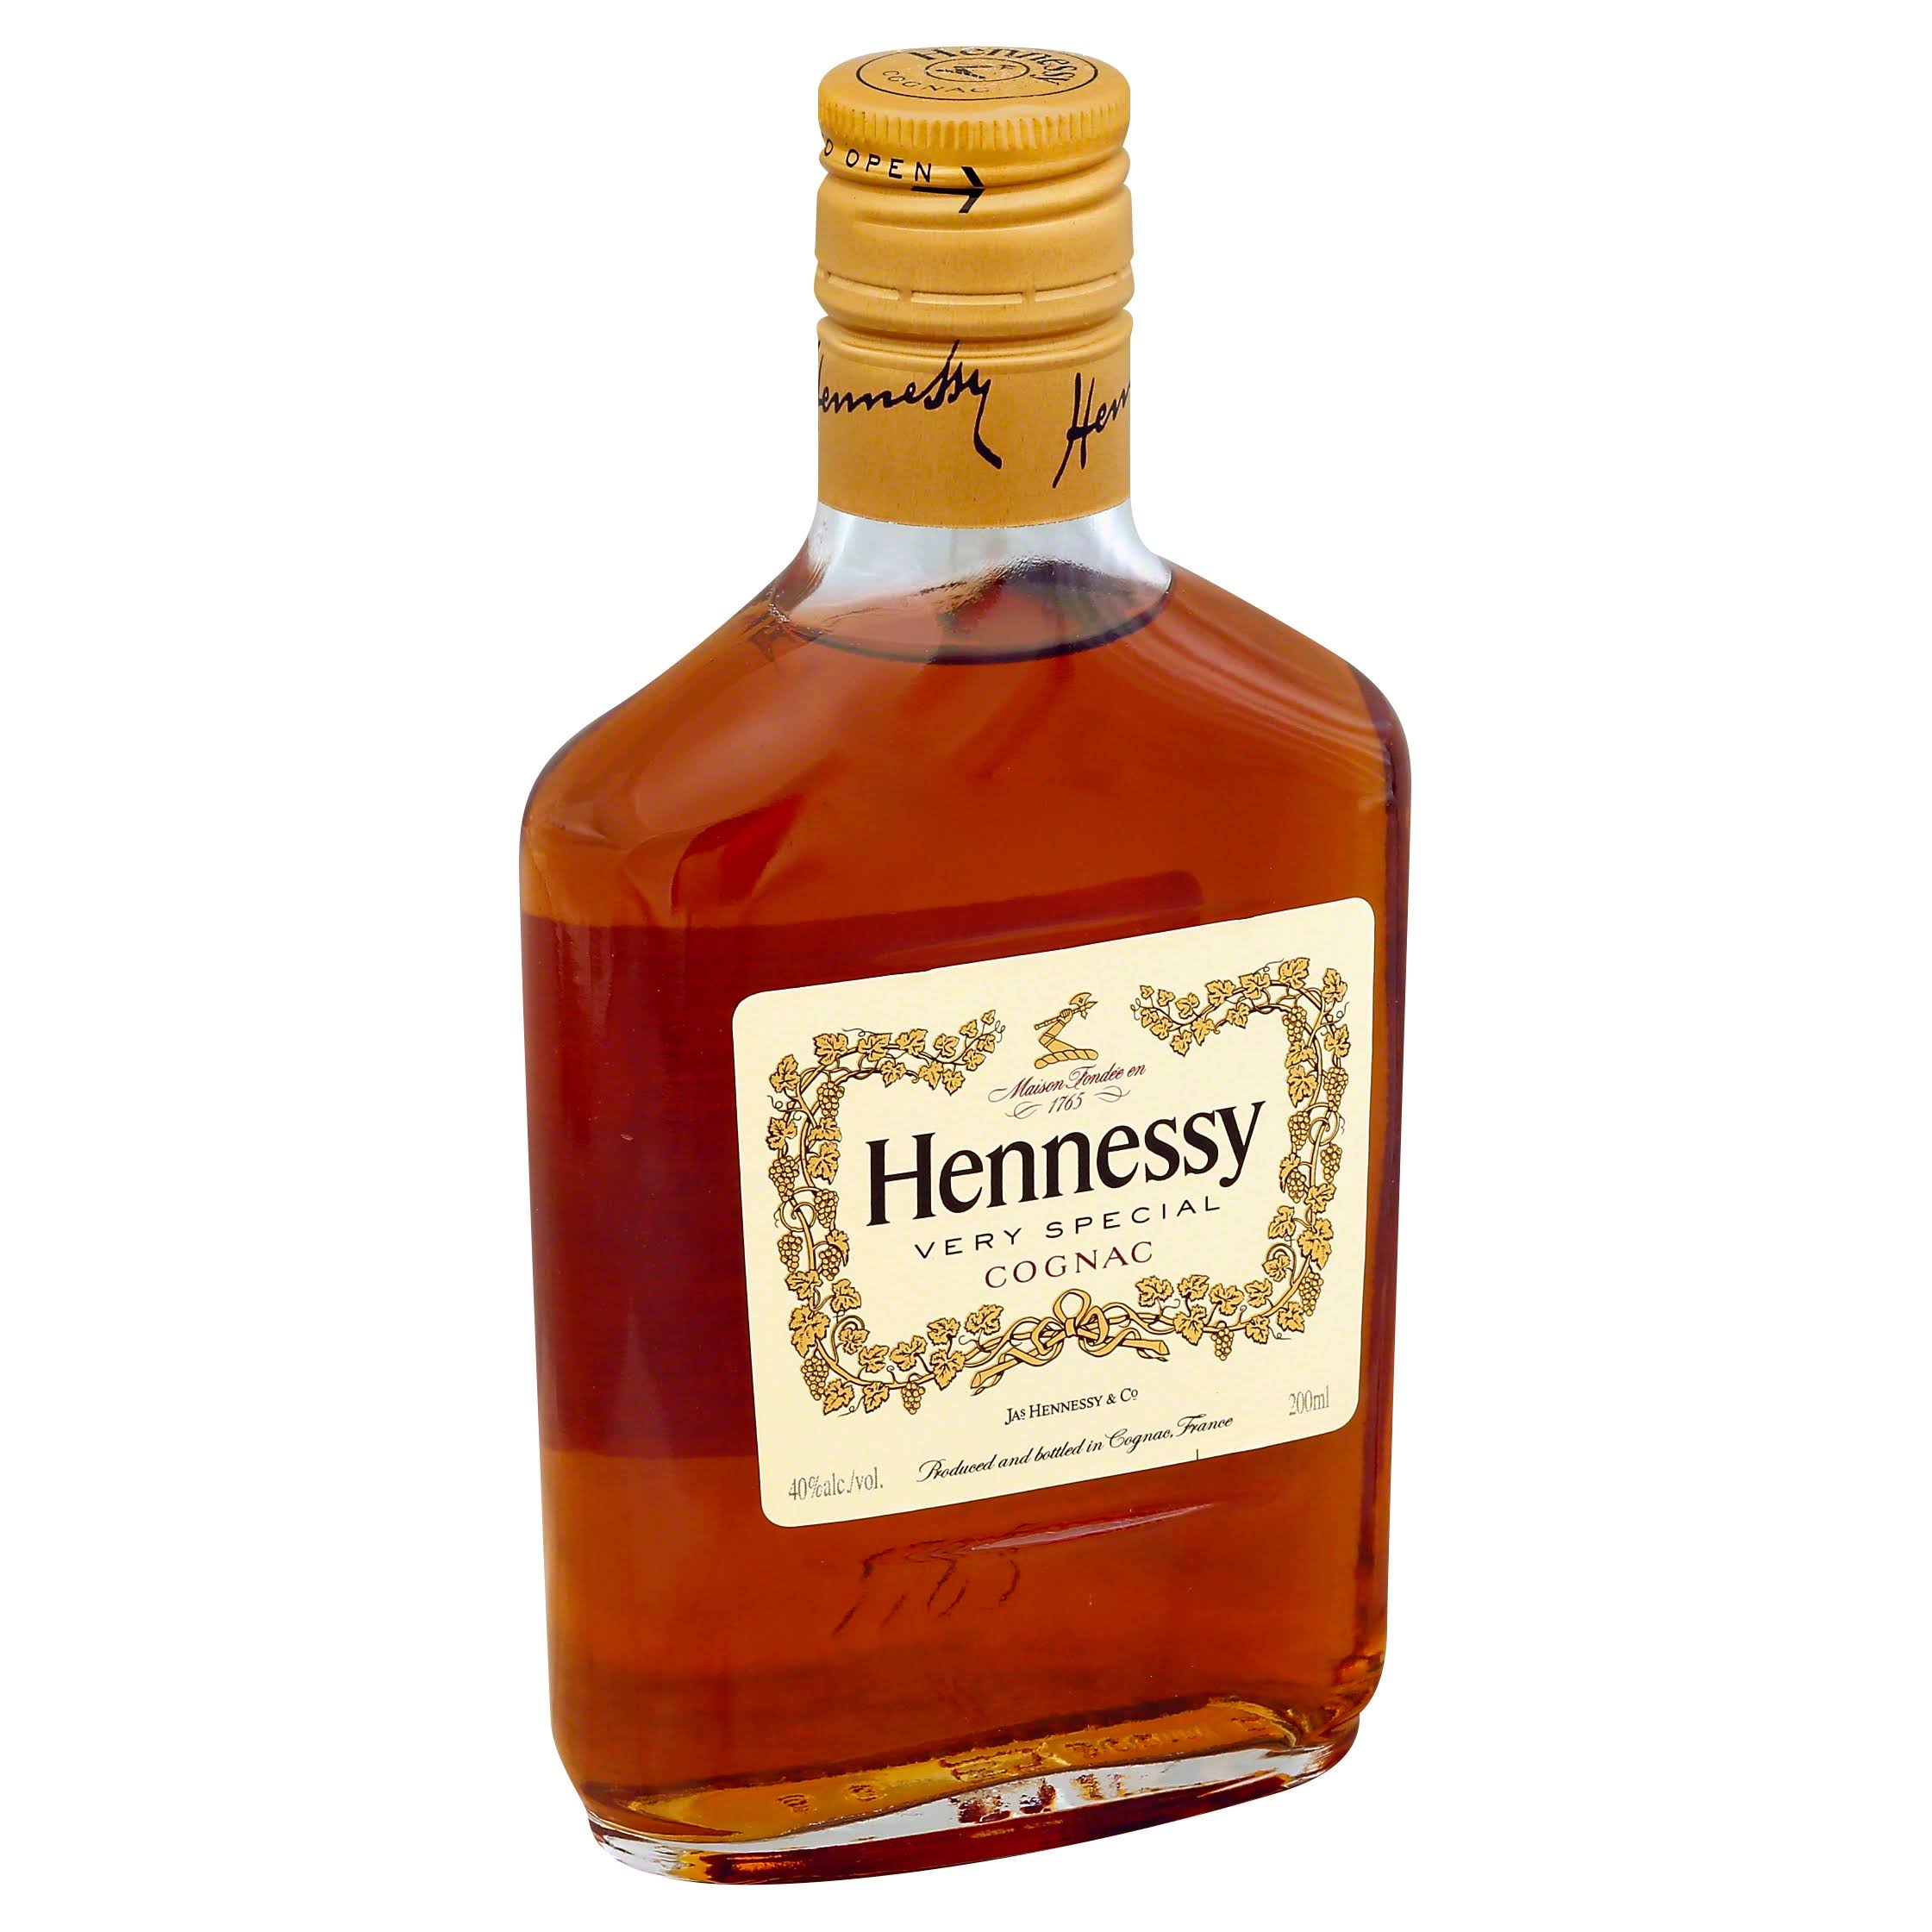 Hennessy Very Special Cognac - 200 ml bottle